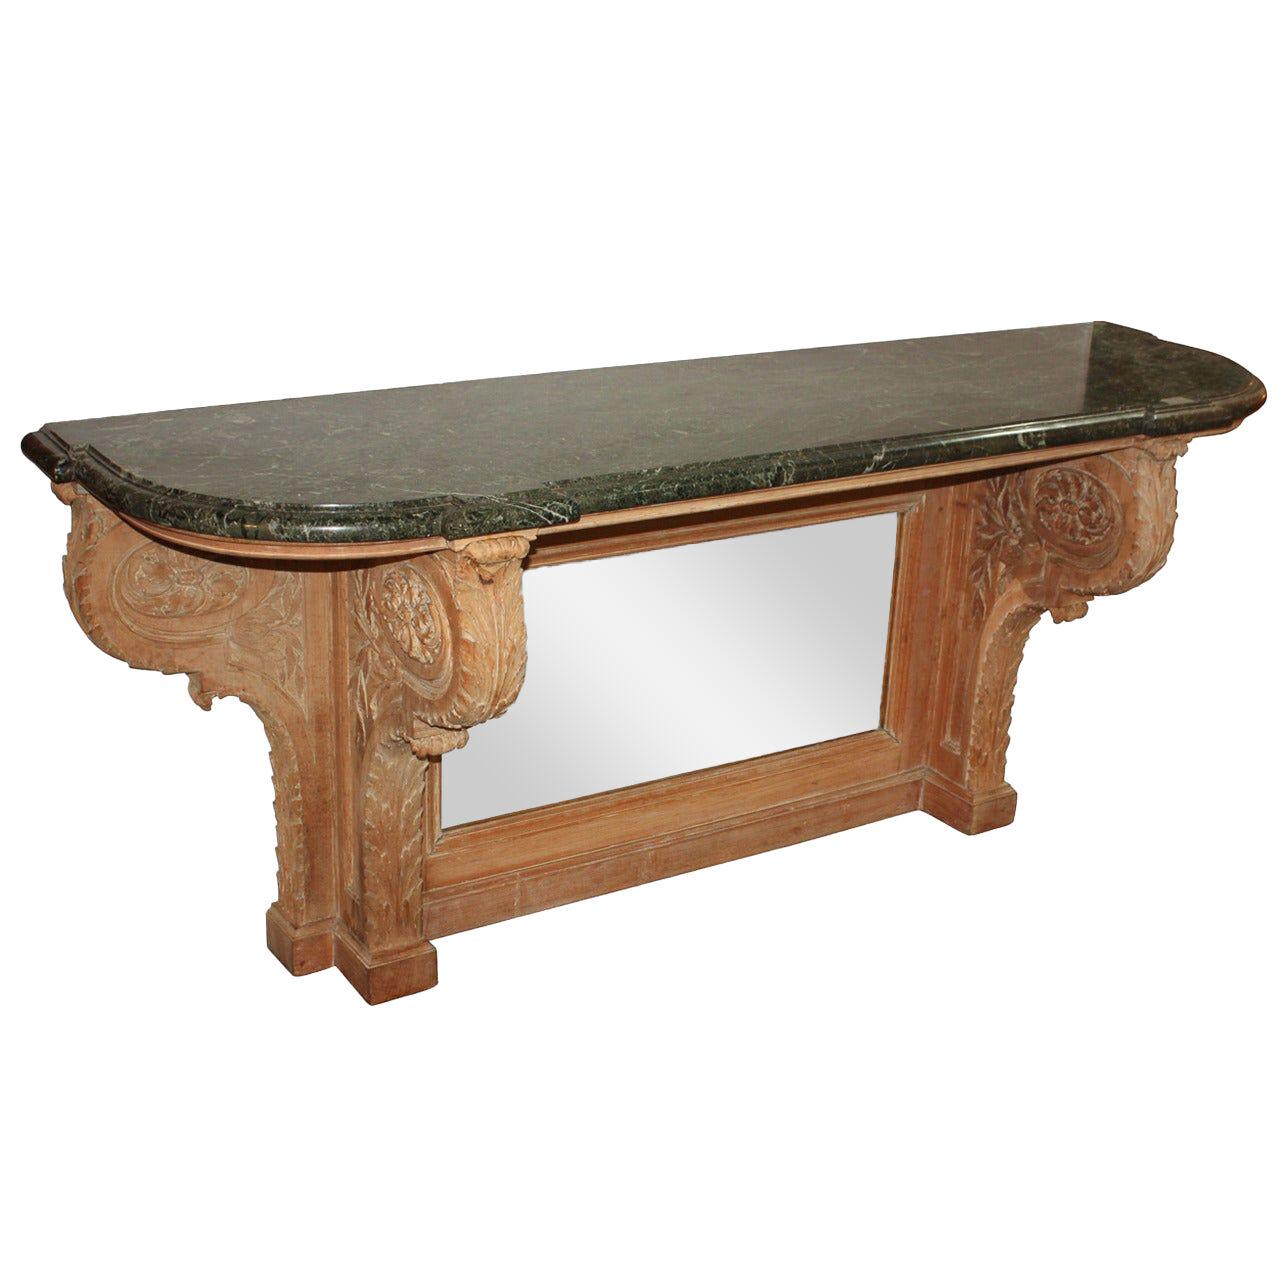 19th Century Continental Stripped Pine Console